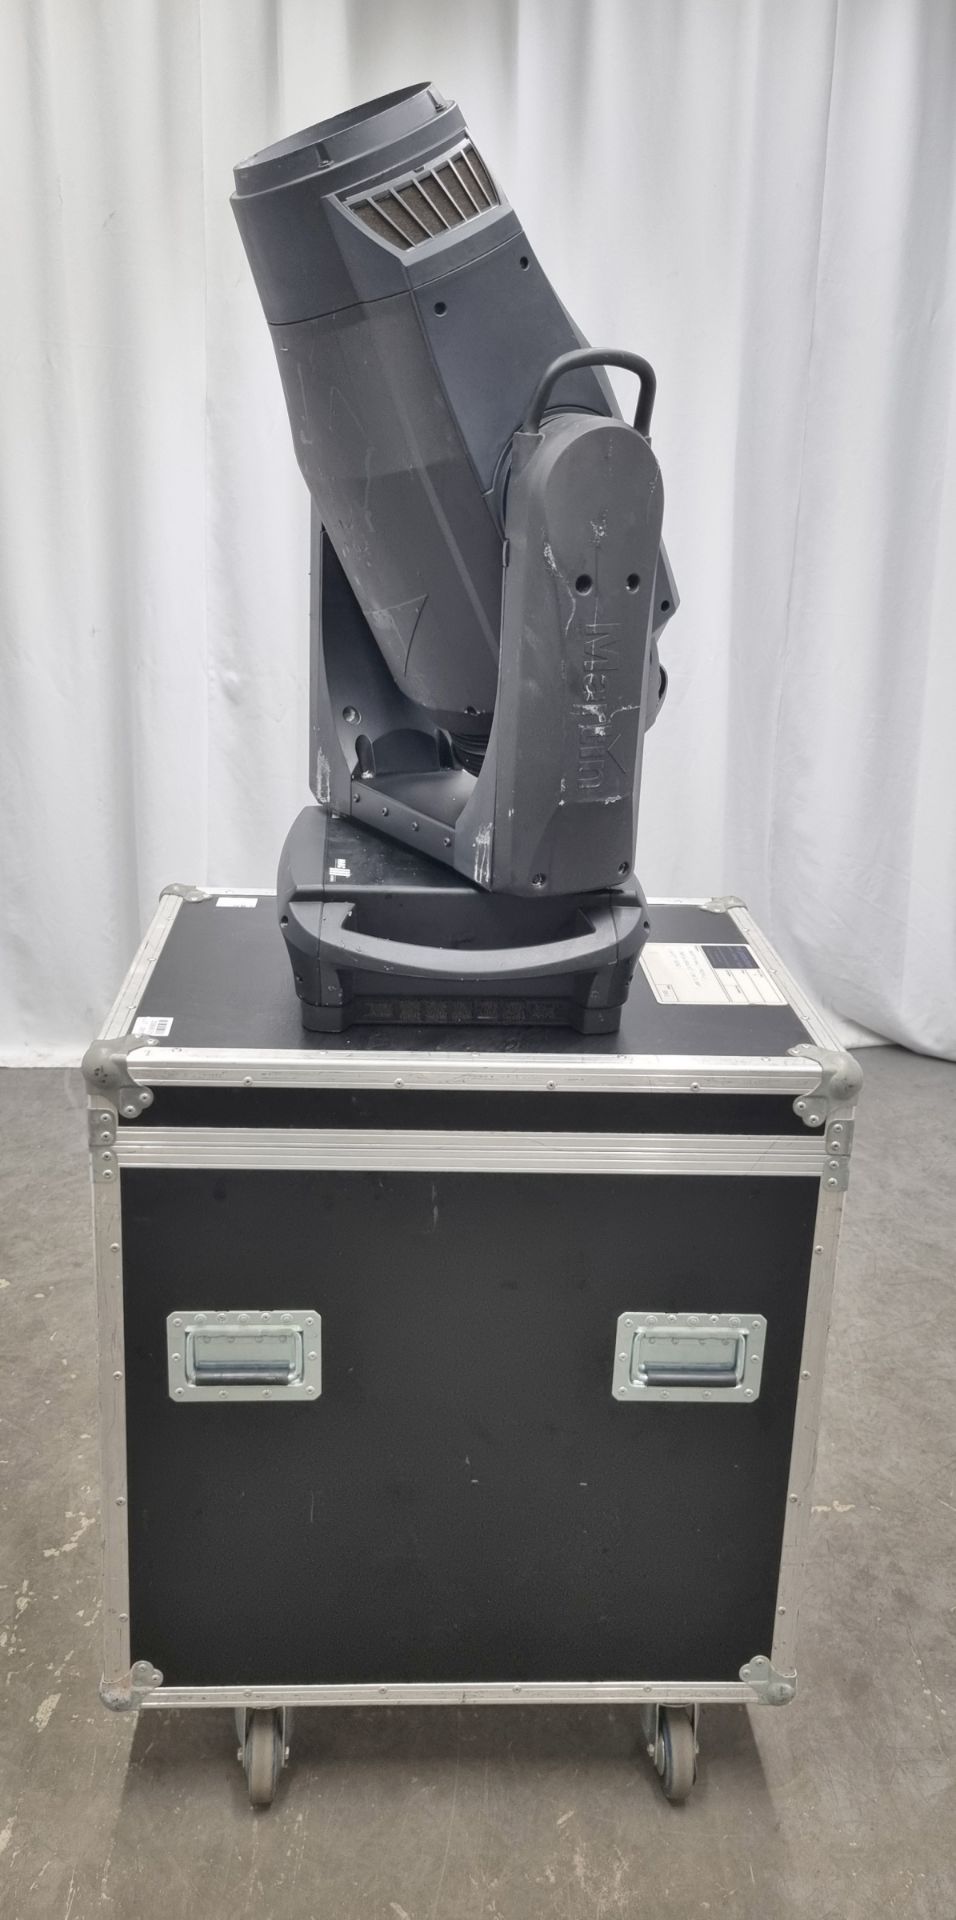 Martin Mac III Profile 1800W high output moving light with flight case on wheels - L 800 x W 600